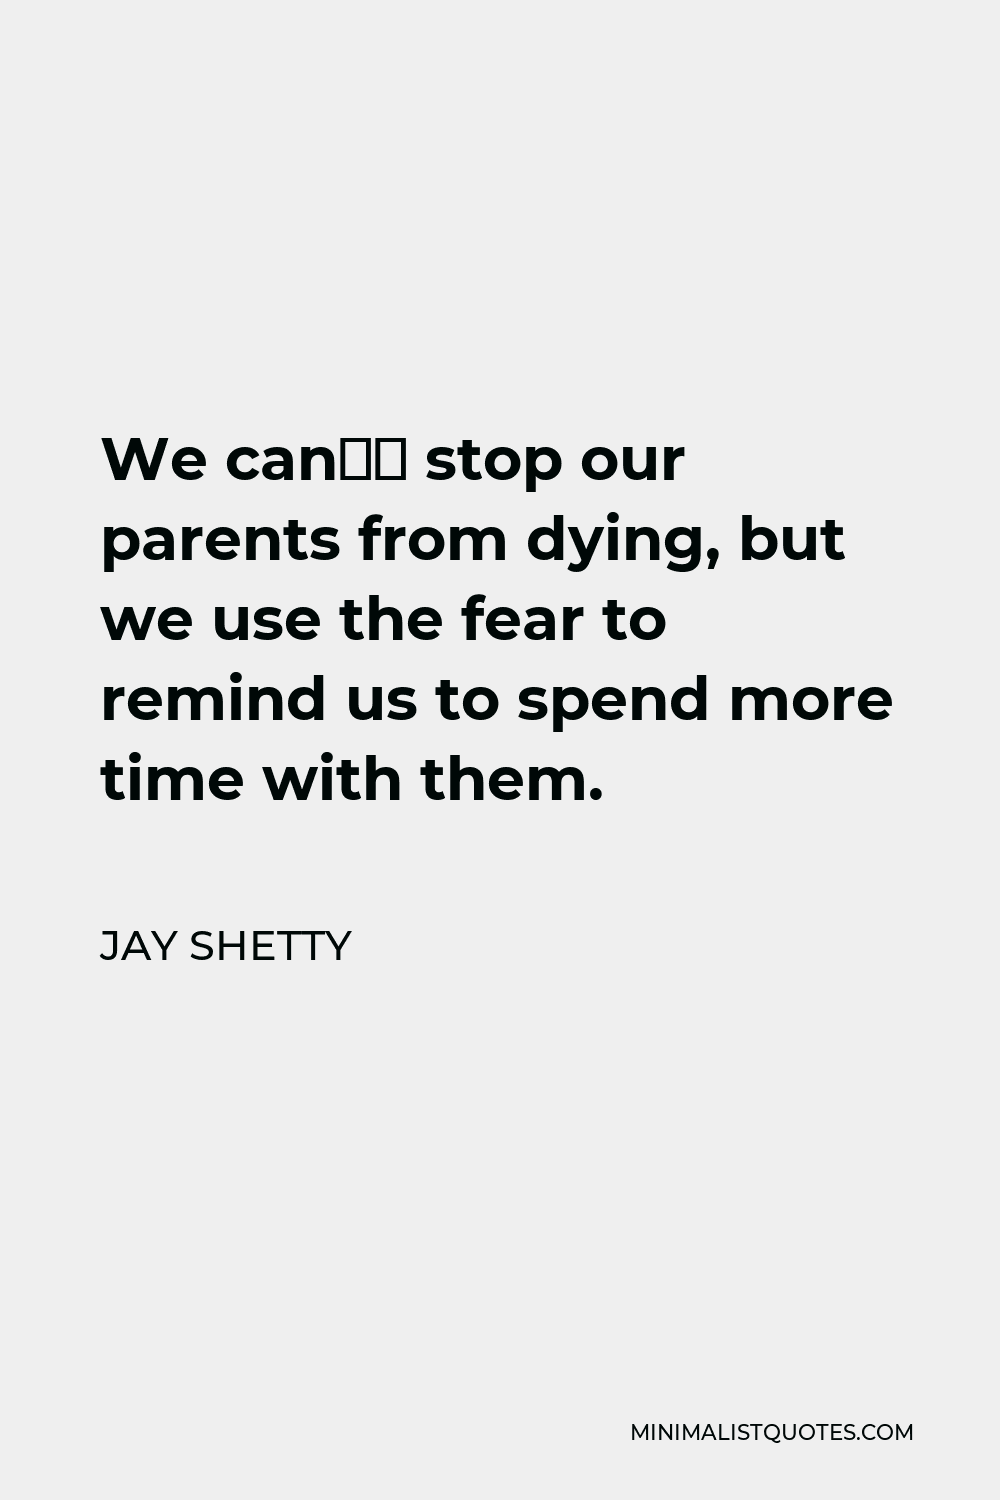 Jay Shetty Quote - We can’t stop our parents from dying, but we use the fear to remind us to spend more time with them.